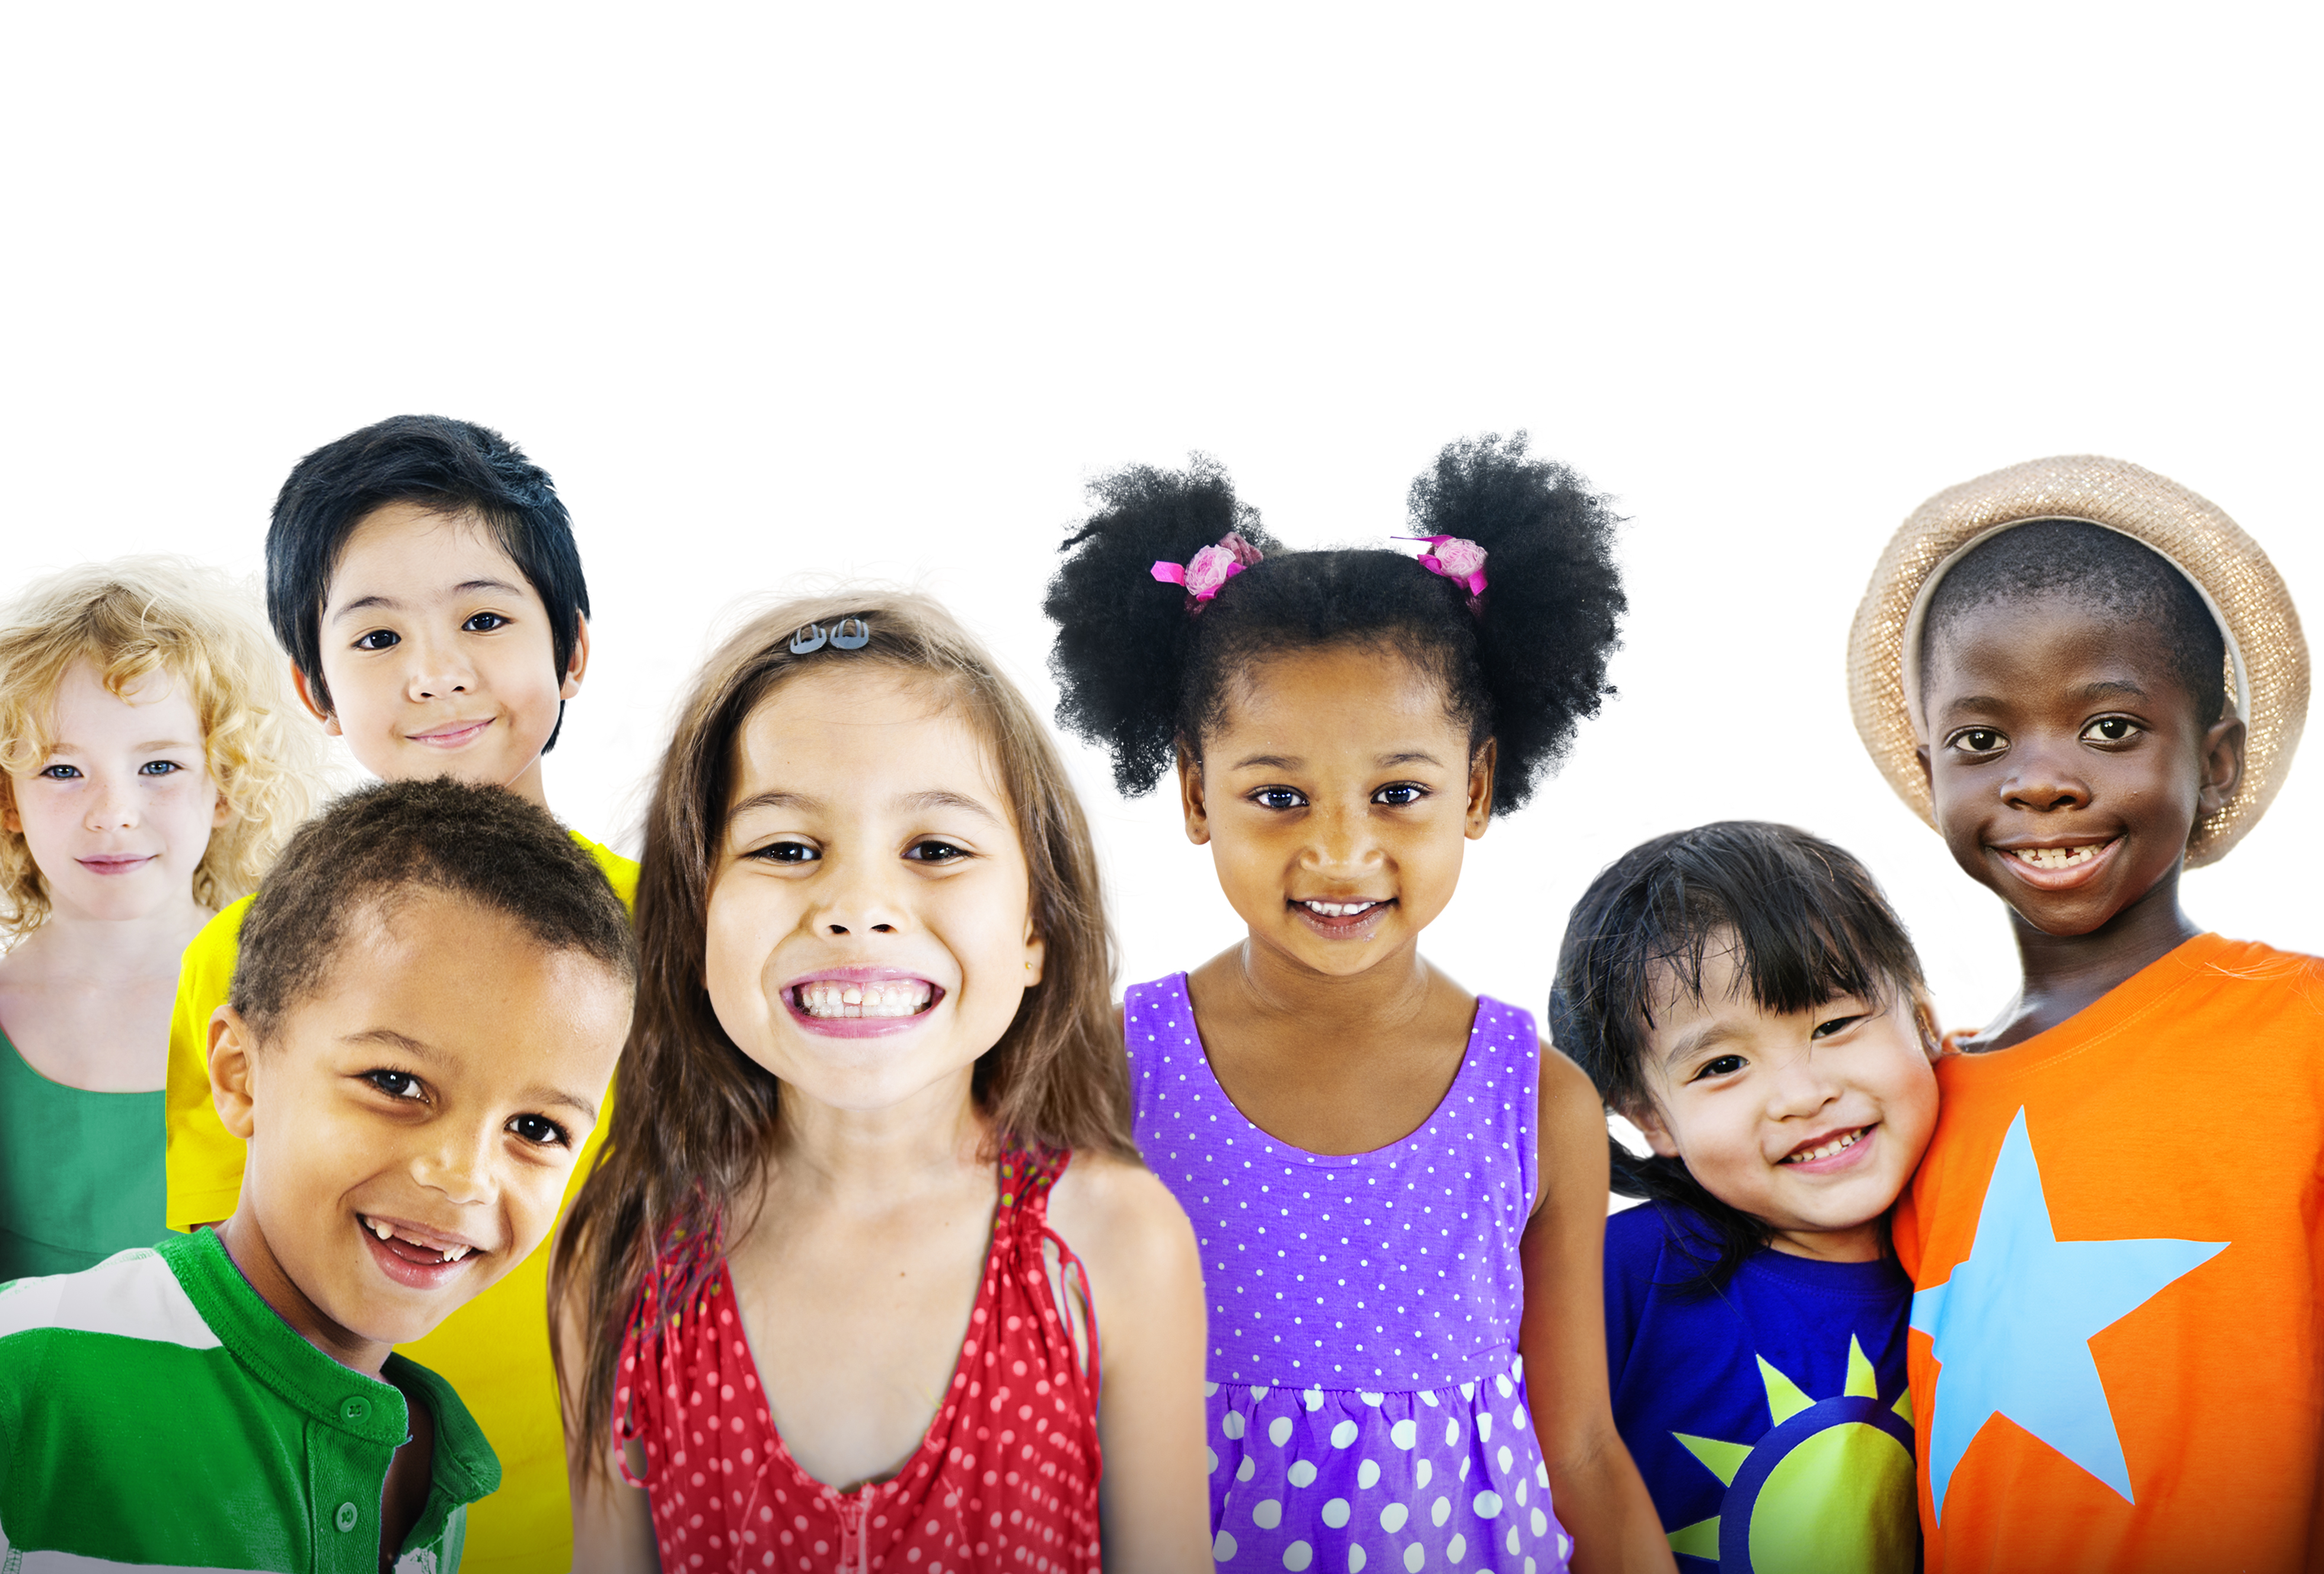 A group of culturally diverse children. Source: Shutterstock, under license.